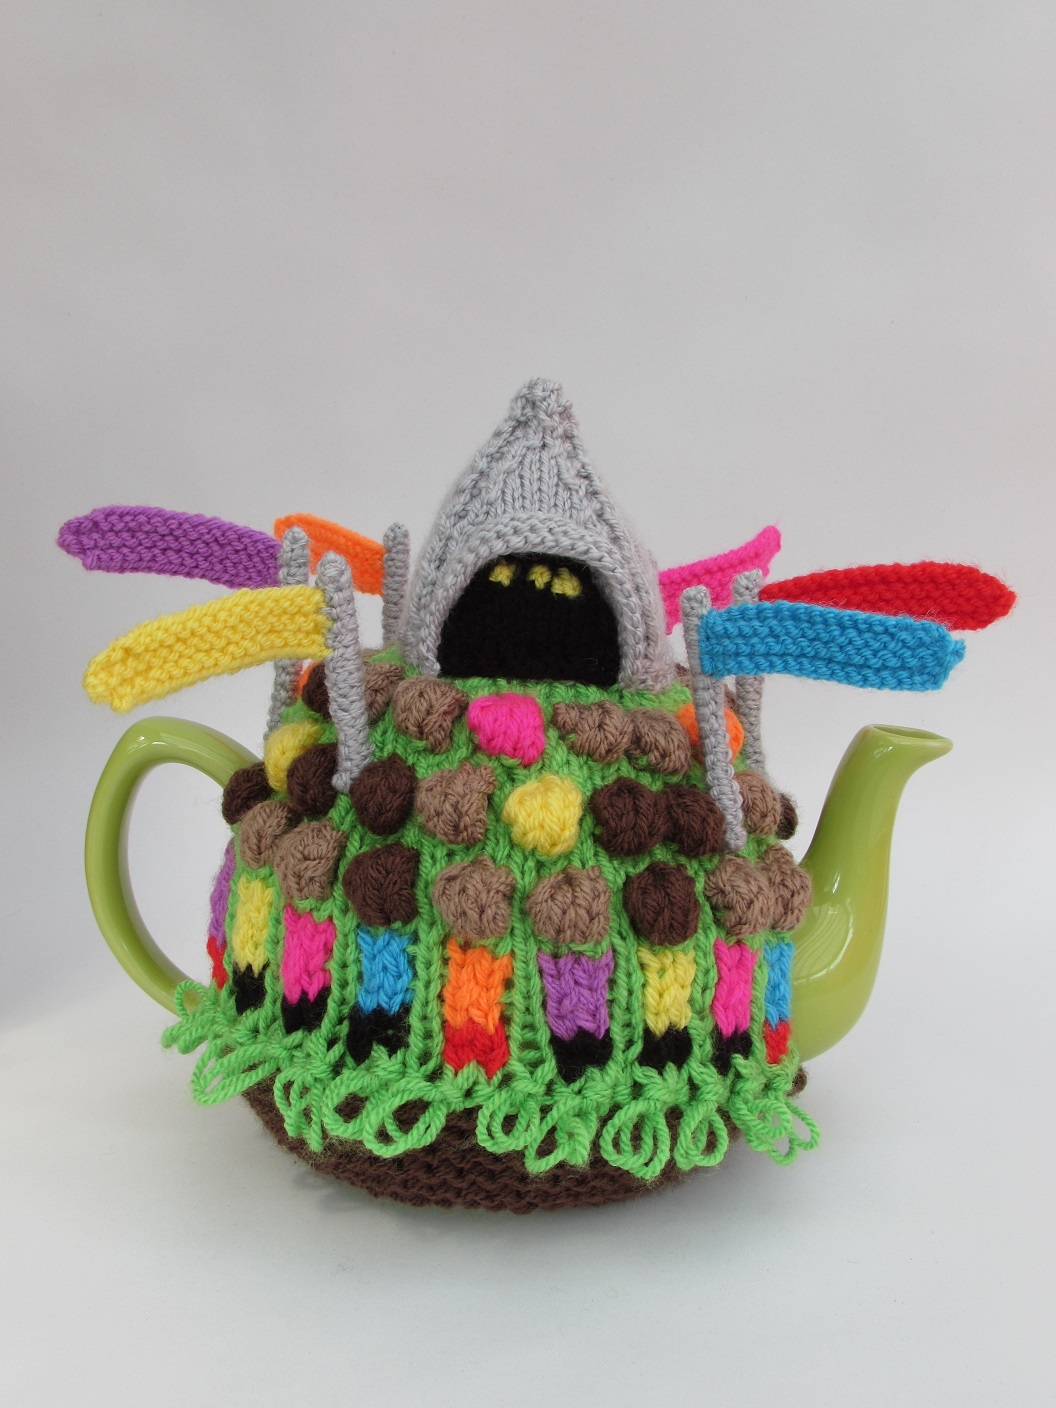 Tea Cosy Knitting Patterns Easy Tea Cosy Knitting Patterns From Tea Cosy Folk Learn How To Knit Our